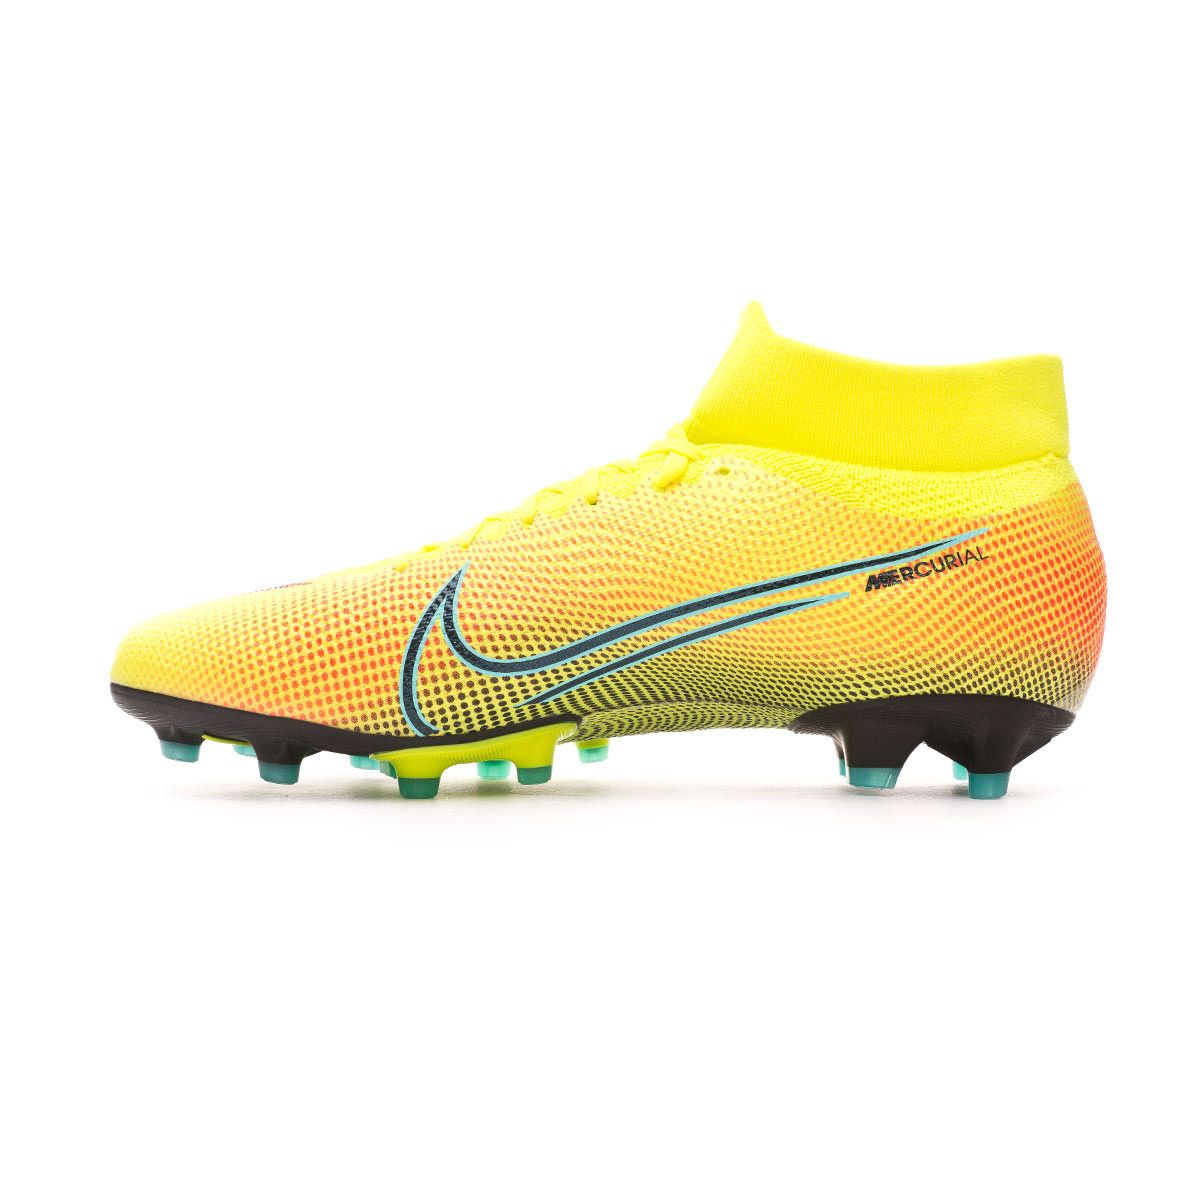 Nike Performance Mercurial Superfly 7 Elite AG Pro. Outfitter